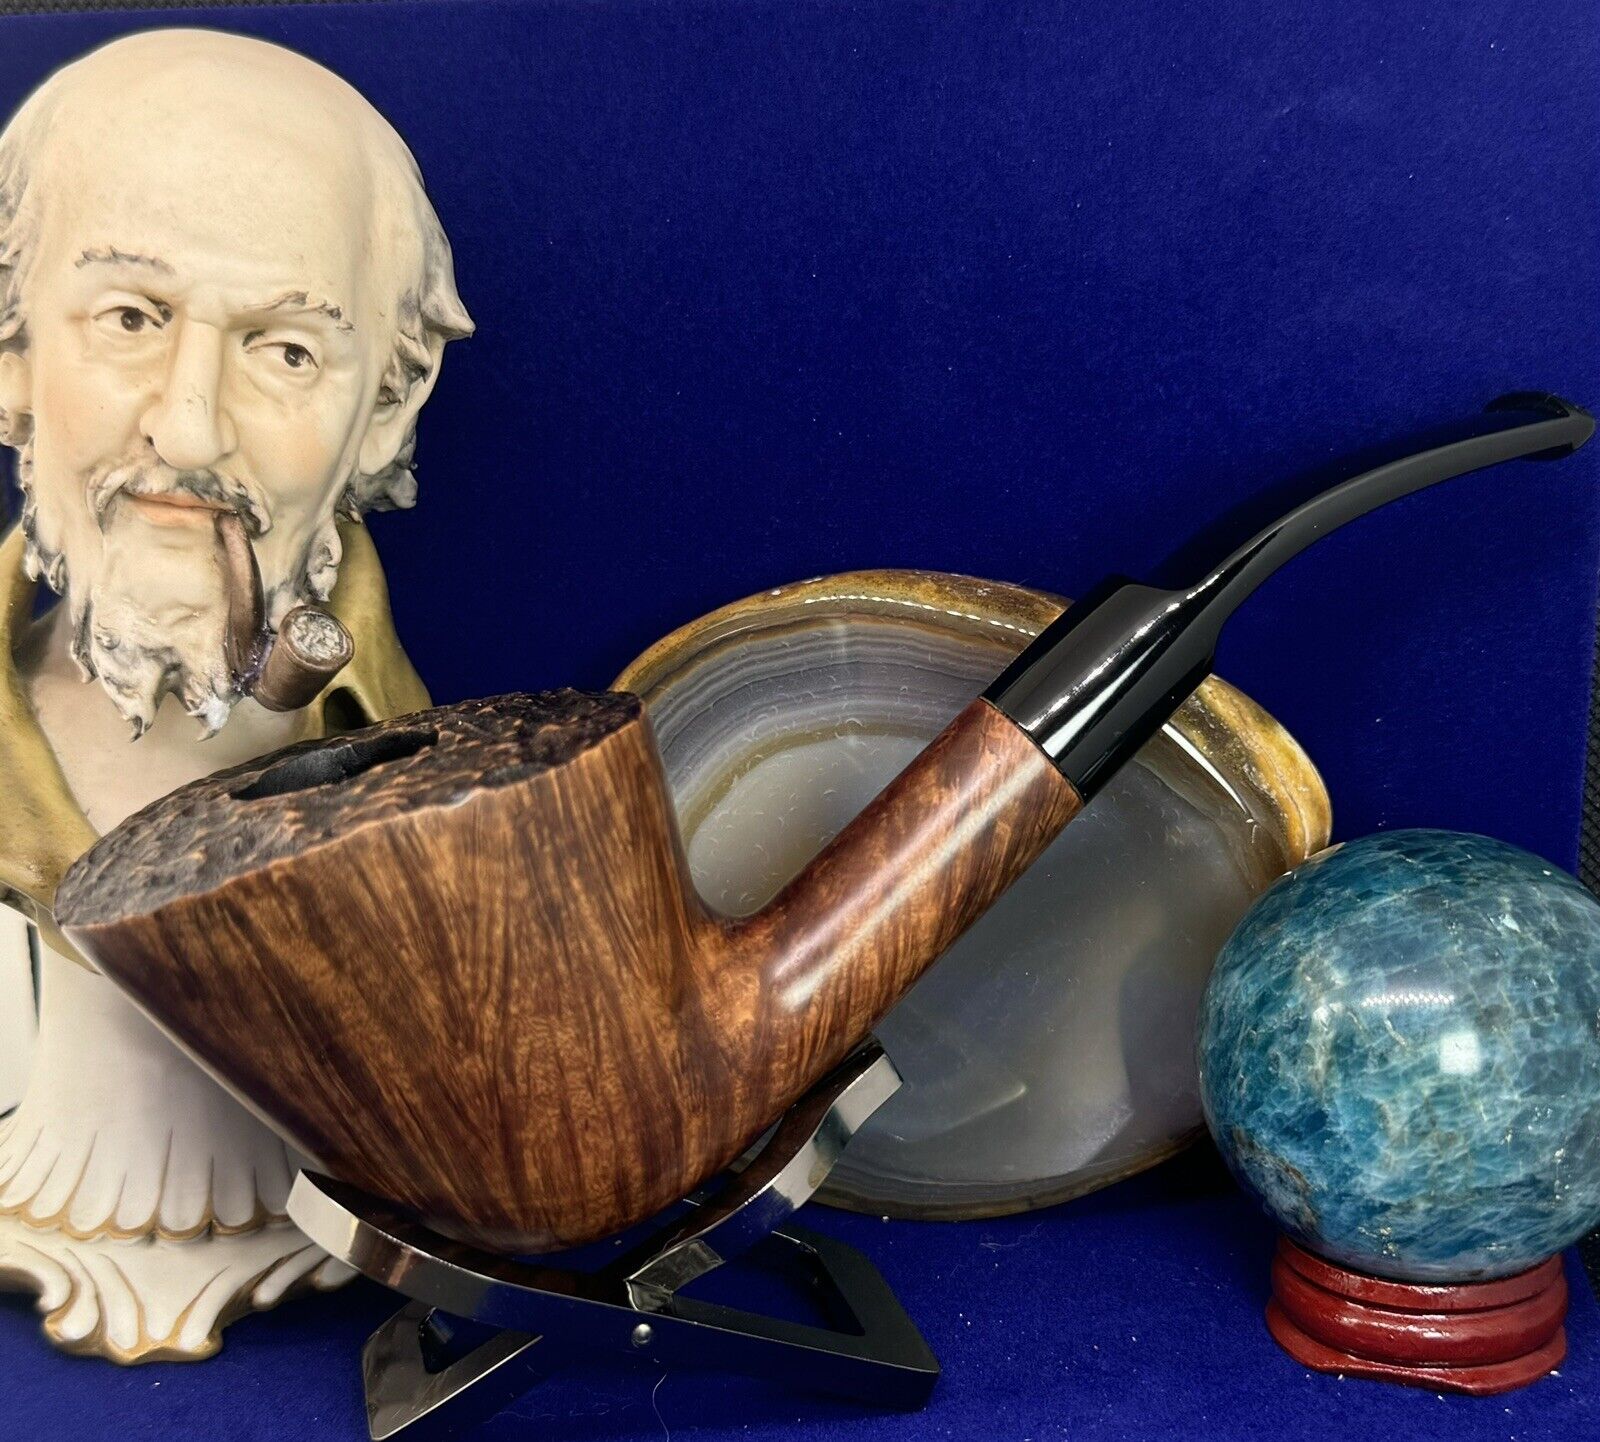 •NEW• Unsmoked FREEHAND Large Handmade FLAME GRAIN Briar Pipe by Manelli, Italy